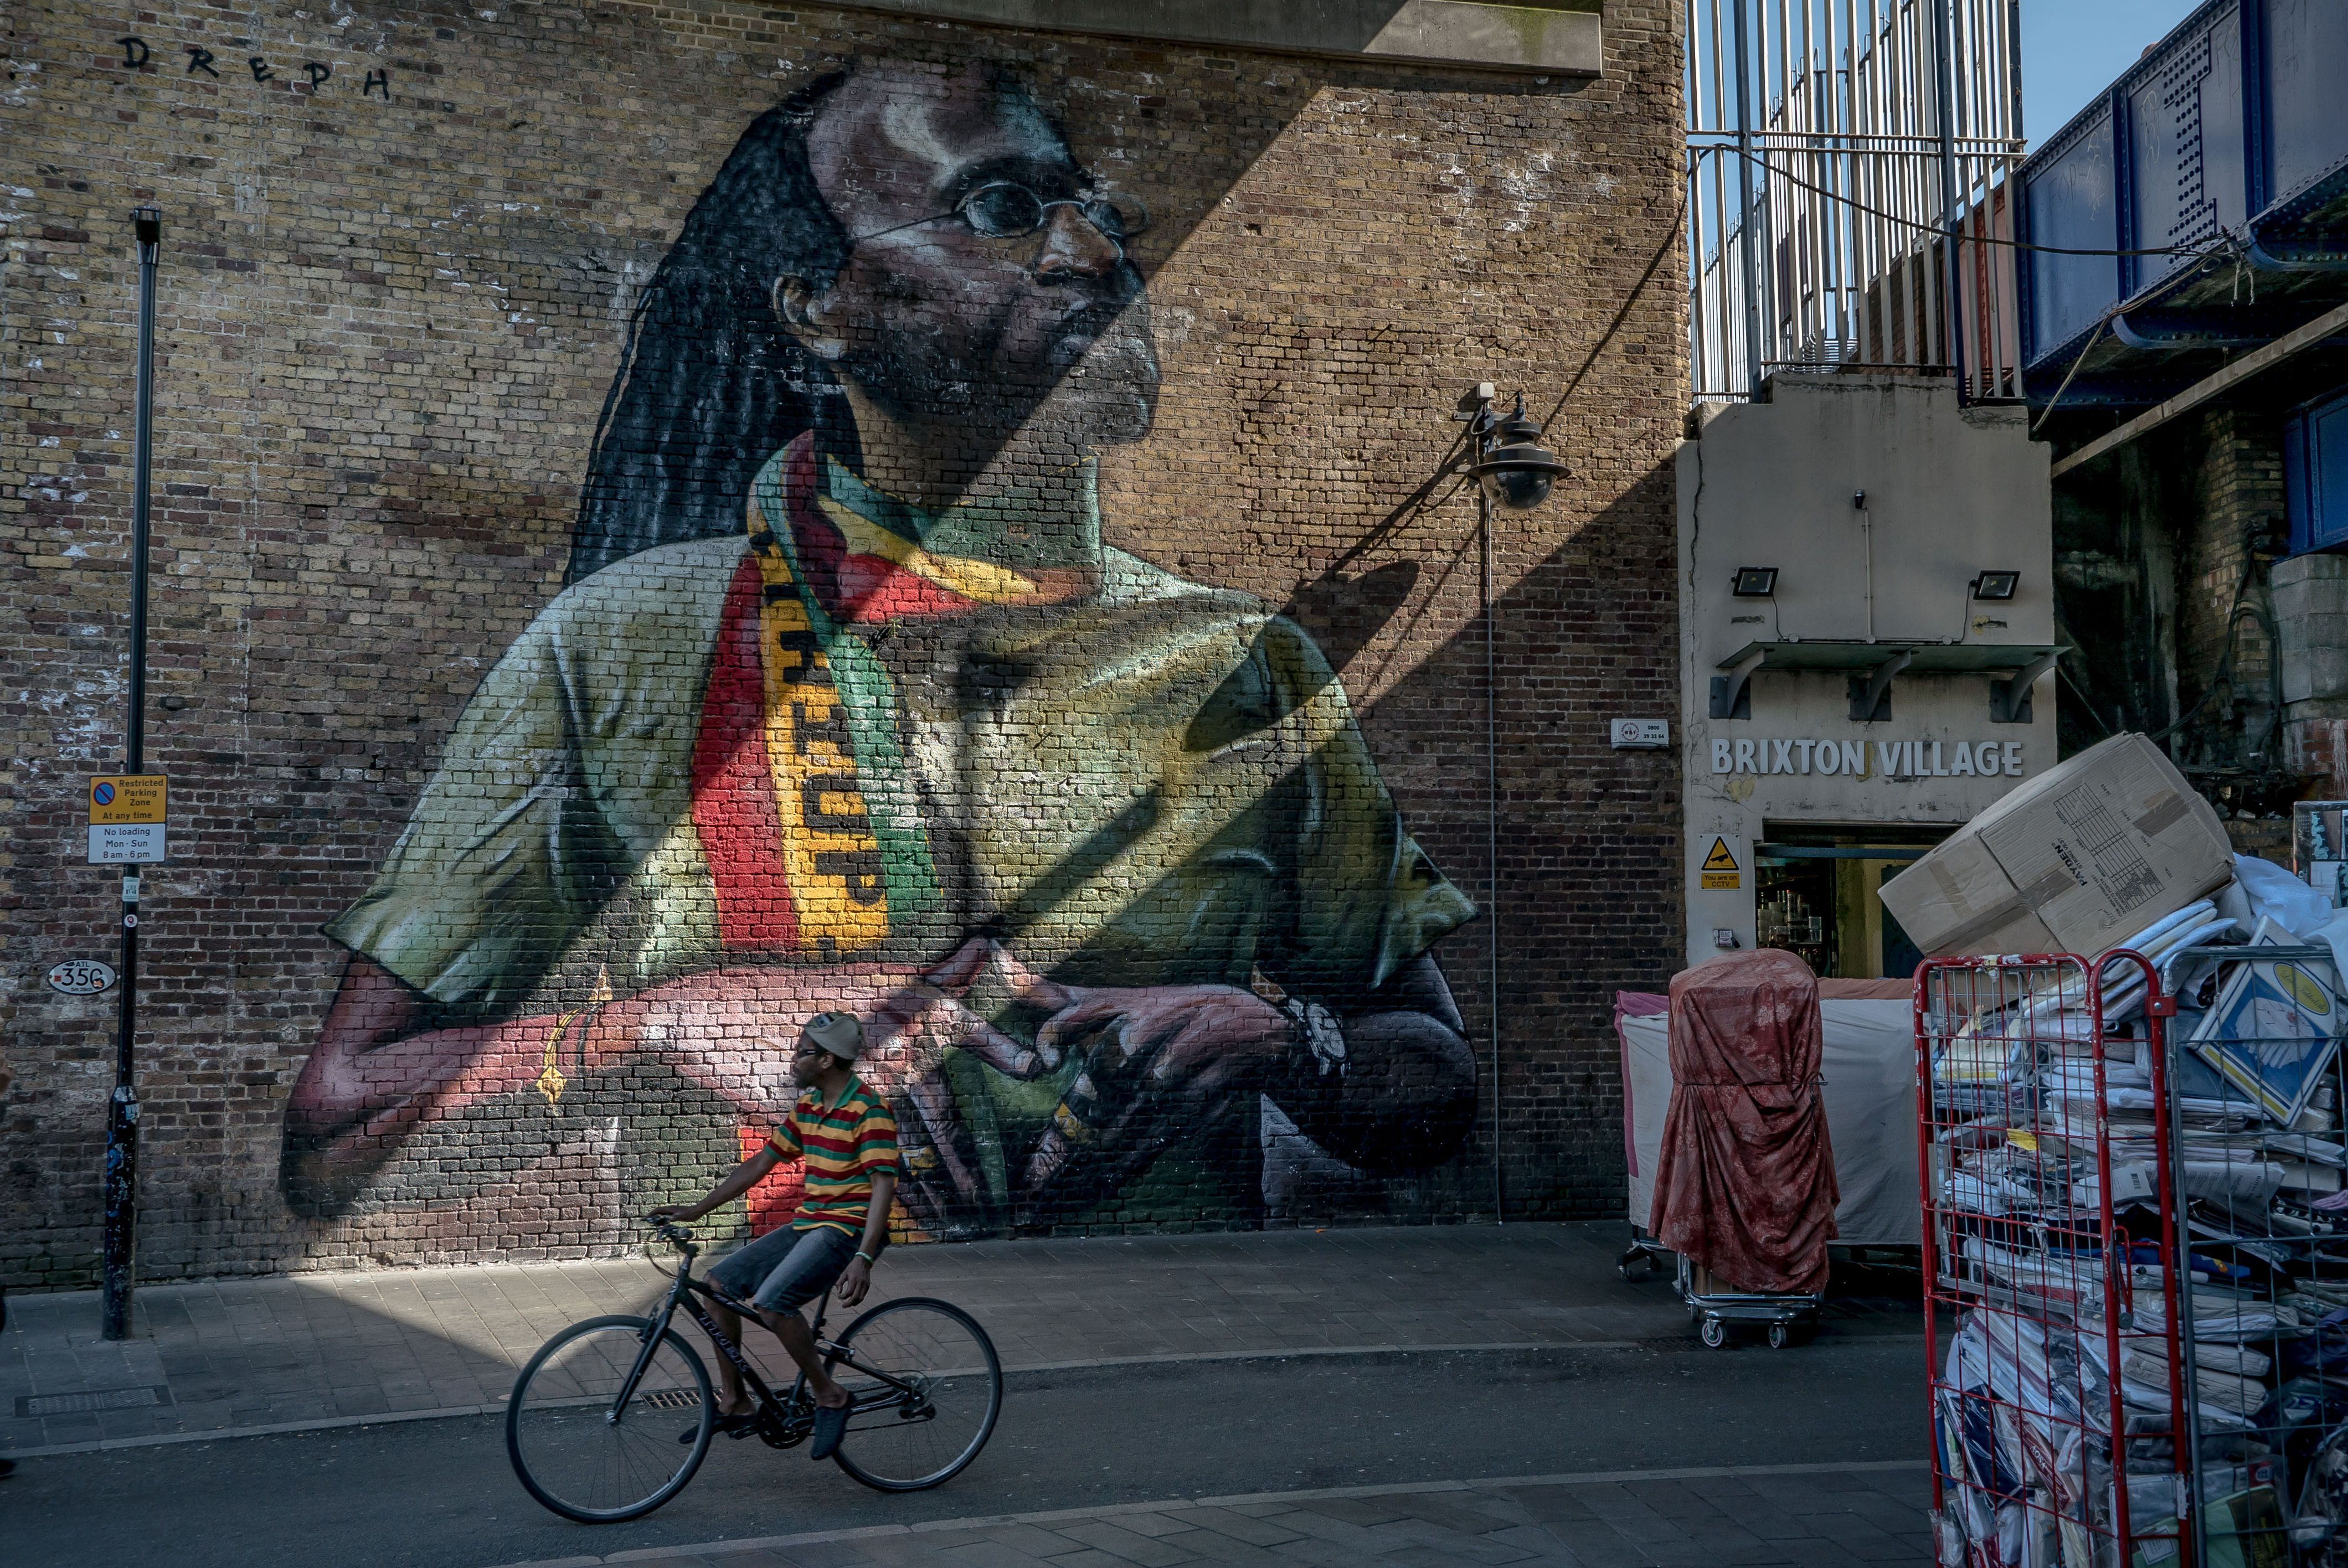 A mural of Bob Marley in Brixton, the heart of London's West Indian immigrant community, April 18, 2018. In a major embarrassment for Britain's conservative government, thousands who came to Britain from the Caribbean in the postwar years -- dubbed "the Windrush generation" after a passenger liner that carried many of them -- have been declared illegal immigrants. (Andrew Testa/The New York Times)